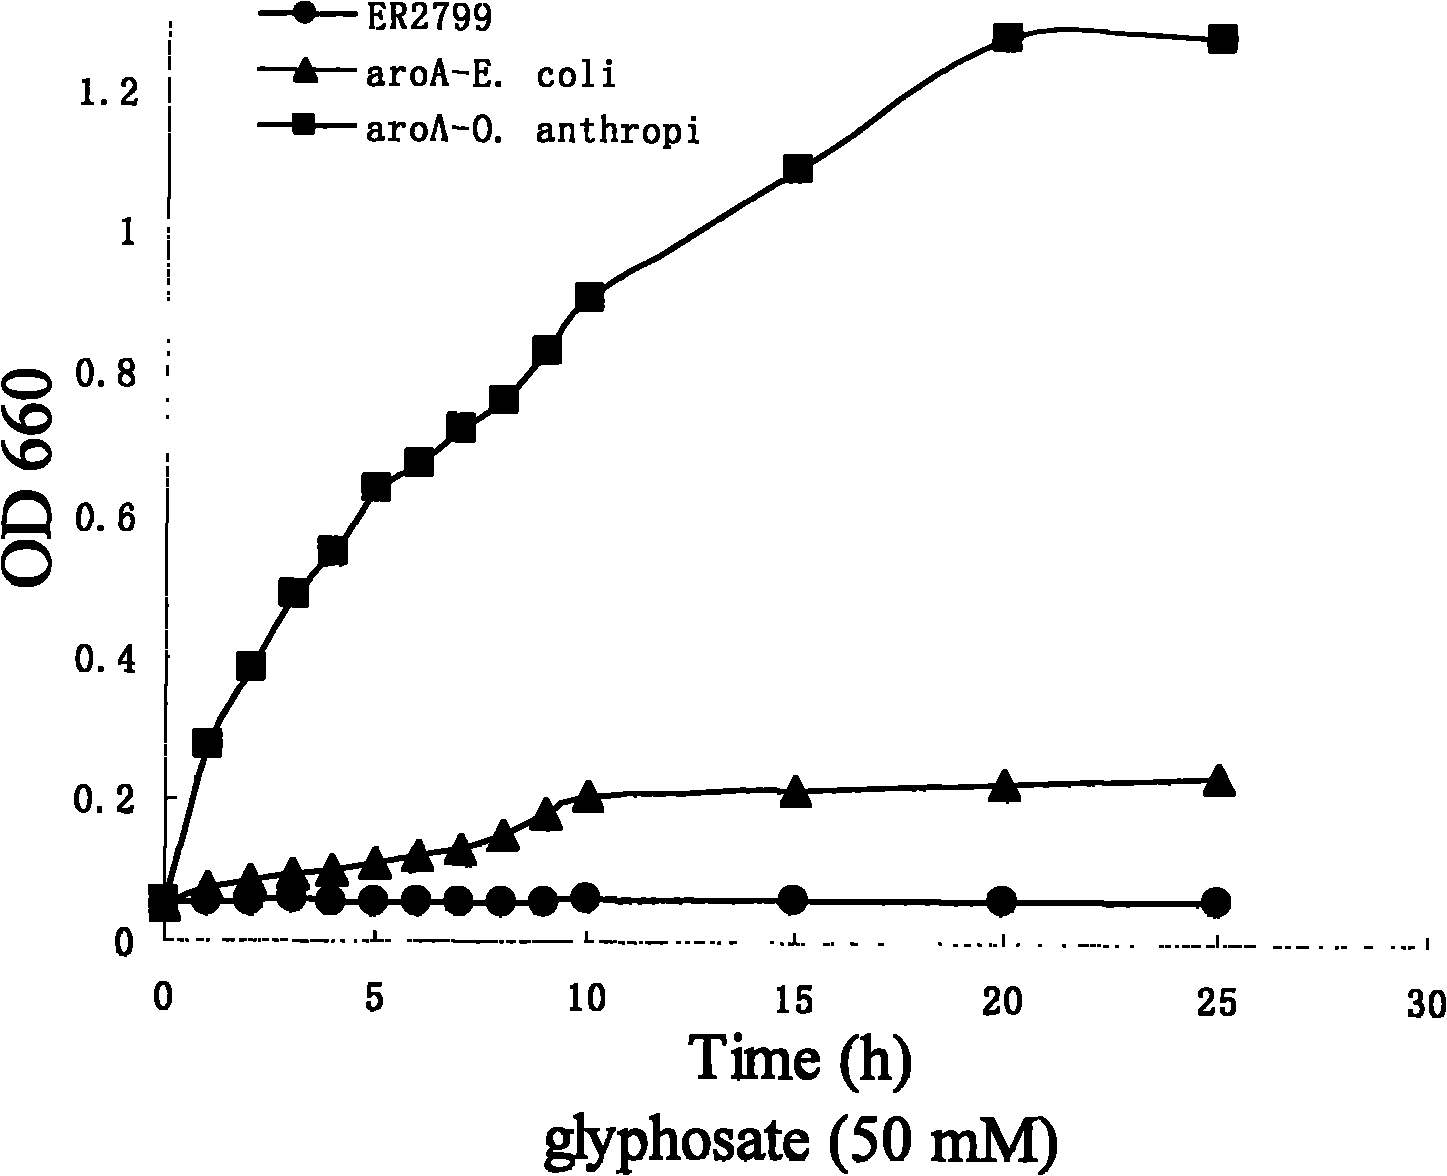 EPSP synthase gene derived from ochrobactrum anthropi and application thereof